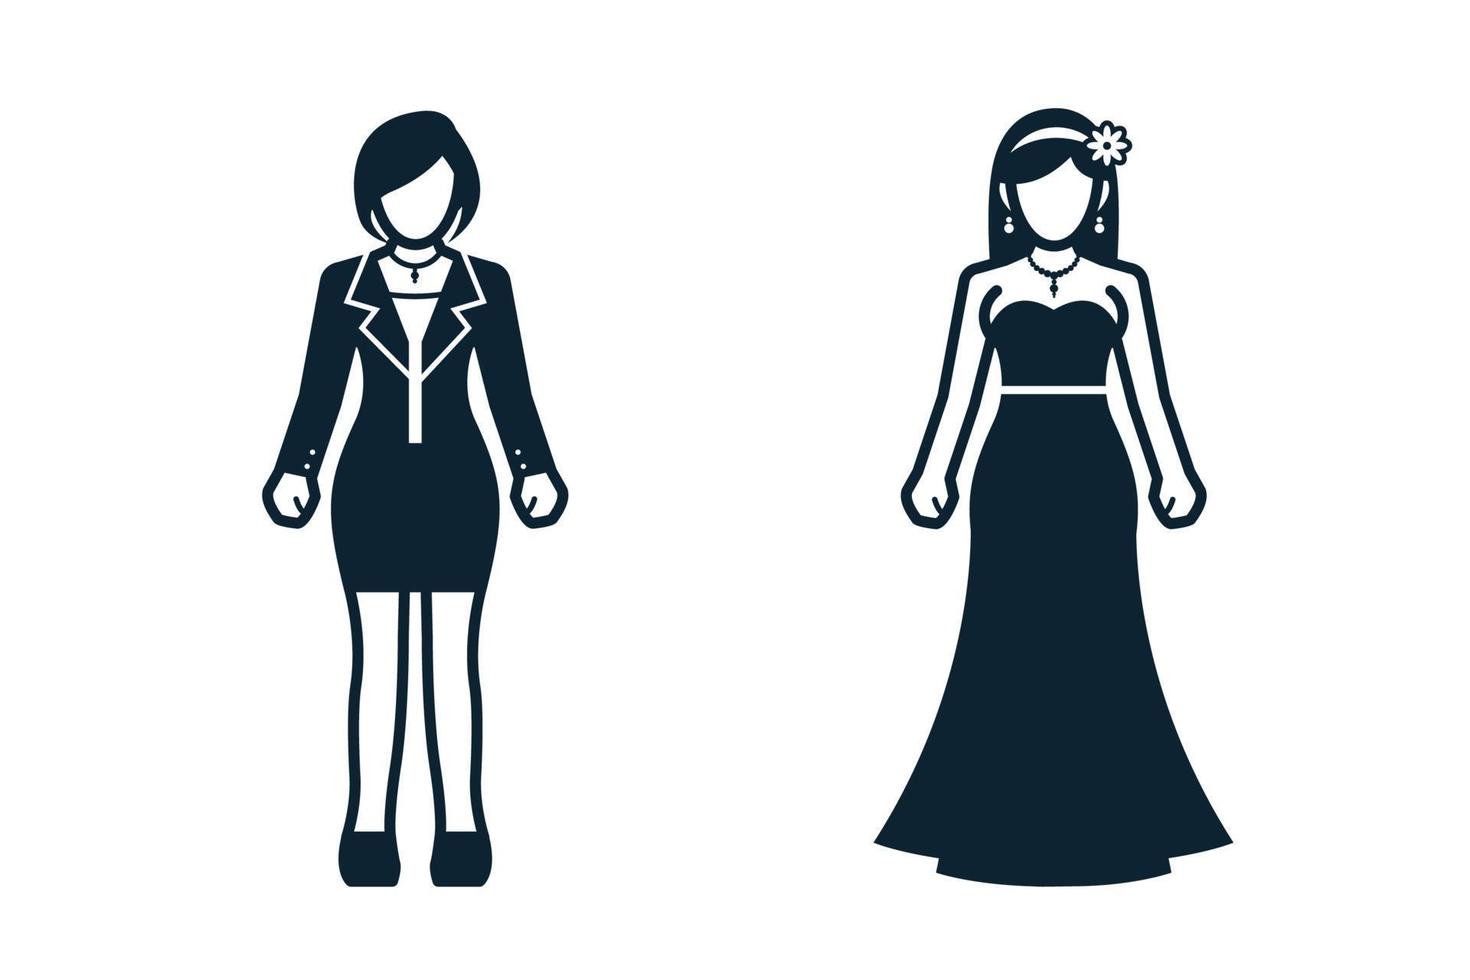 People, Women, Fashion, Clothing icons with White Background vector